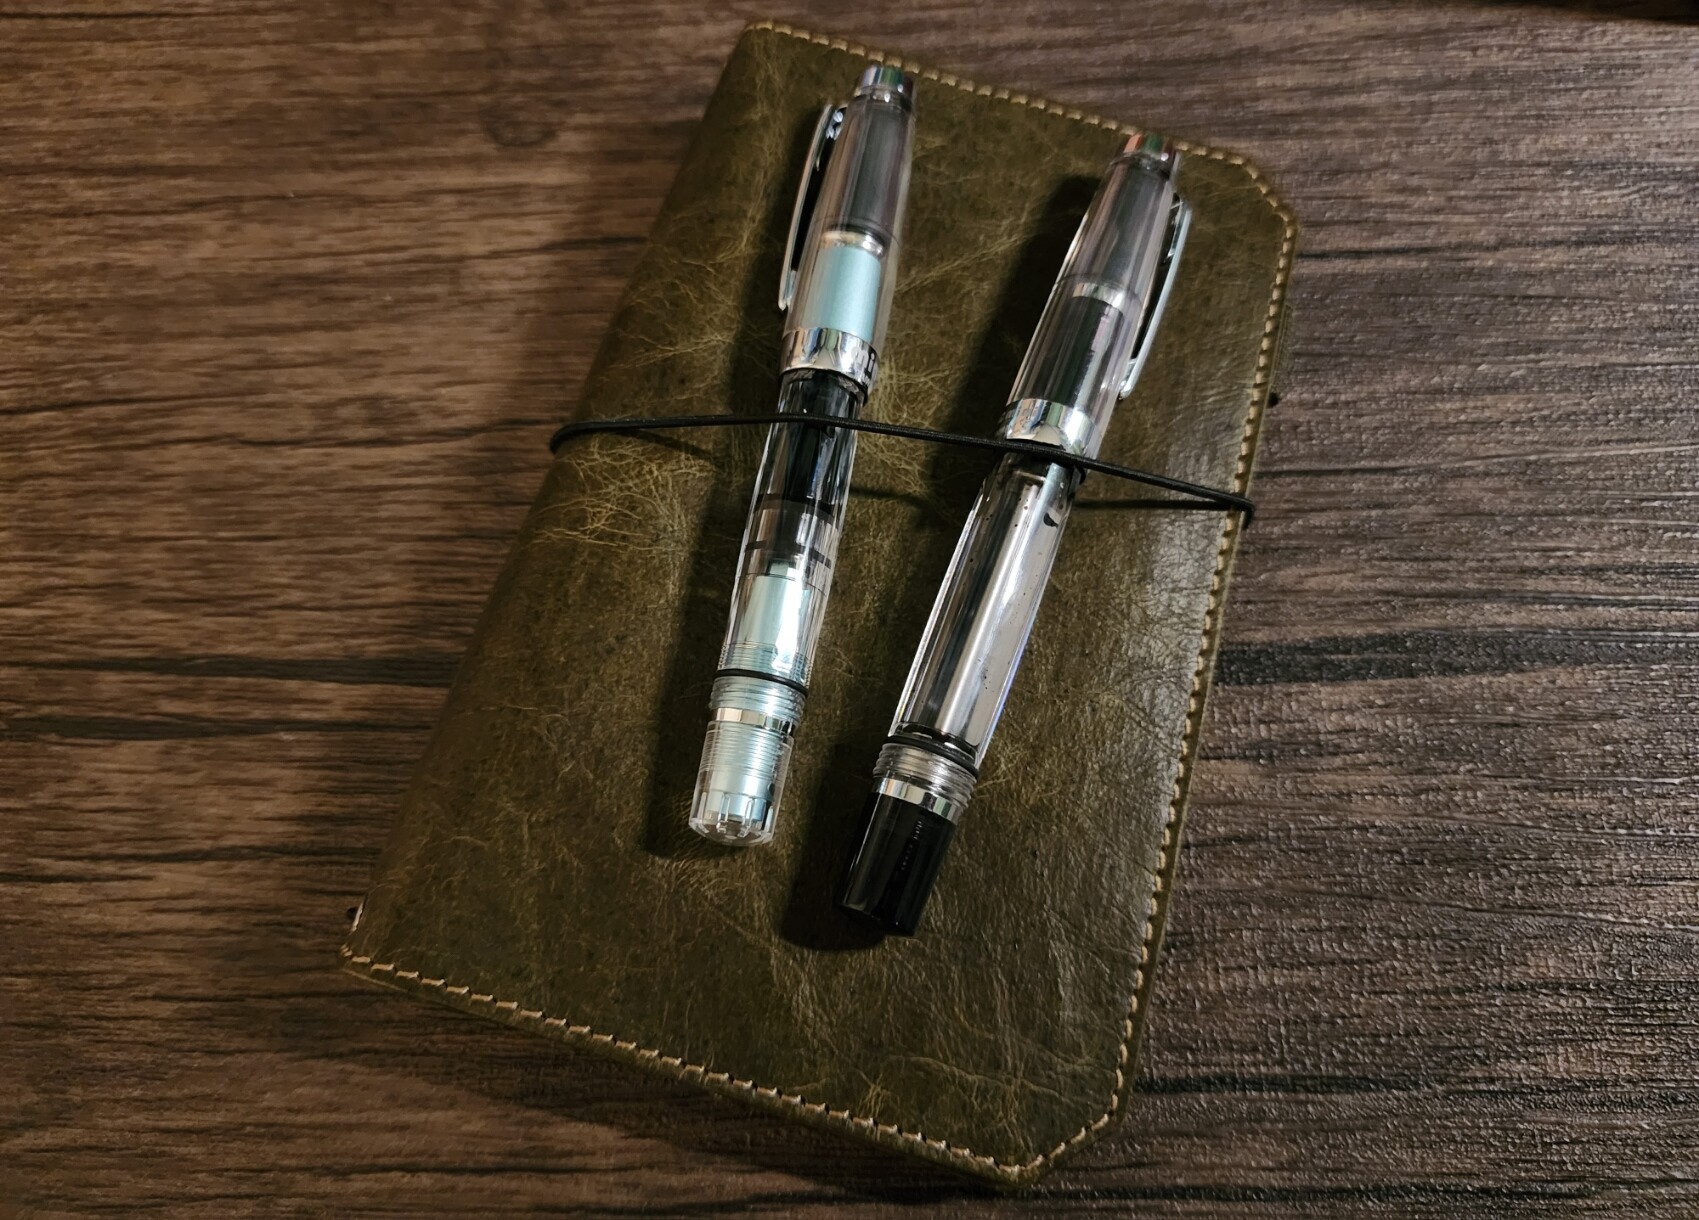 A TWSBI Diamond Mini AL (Mint Blue) and a TWSBI Mini Vac (Smoke) tucked into the elastic band around a passport-size Franklin-Christoph TN notebook cover in Olive NWF material.